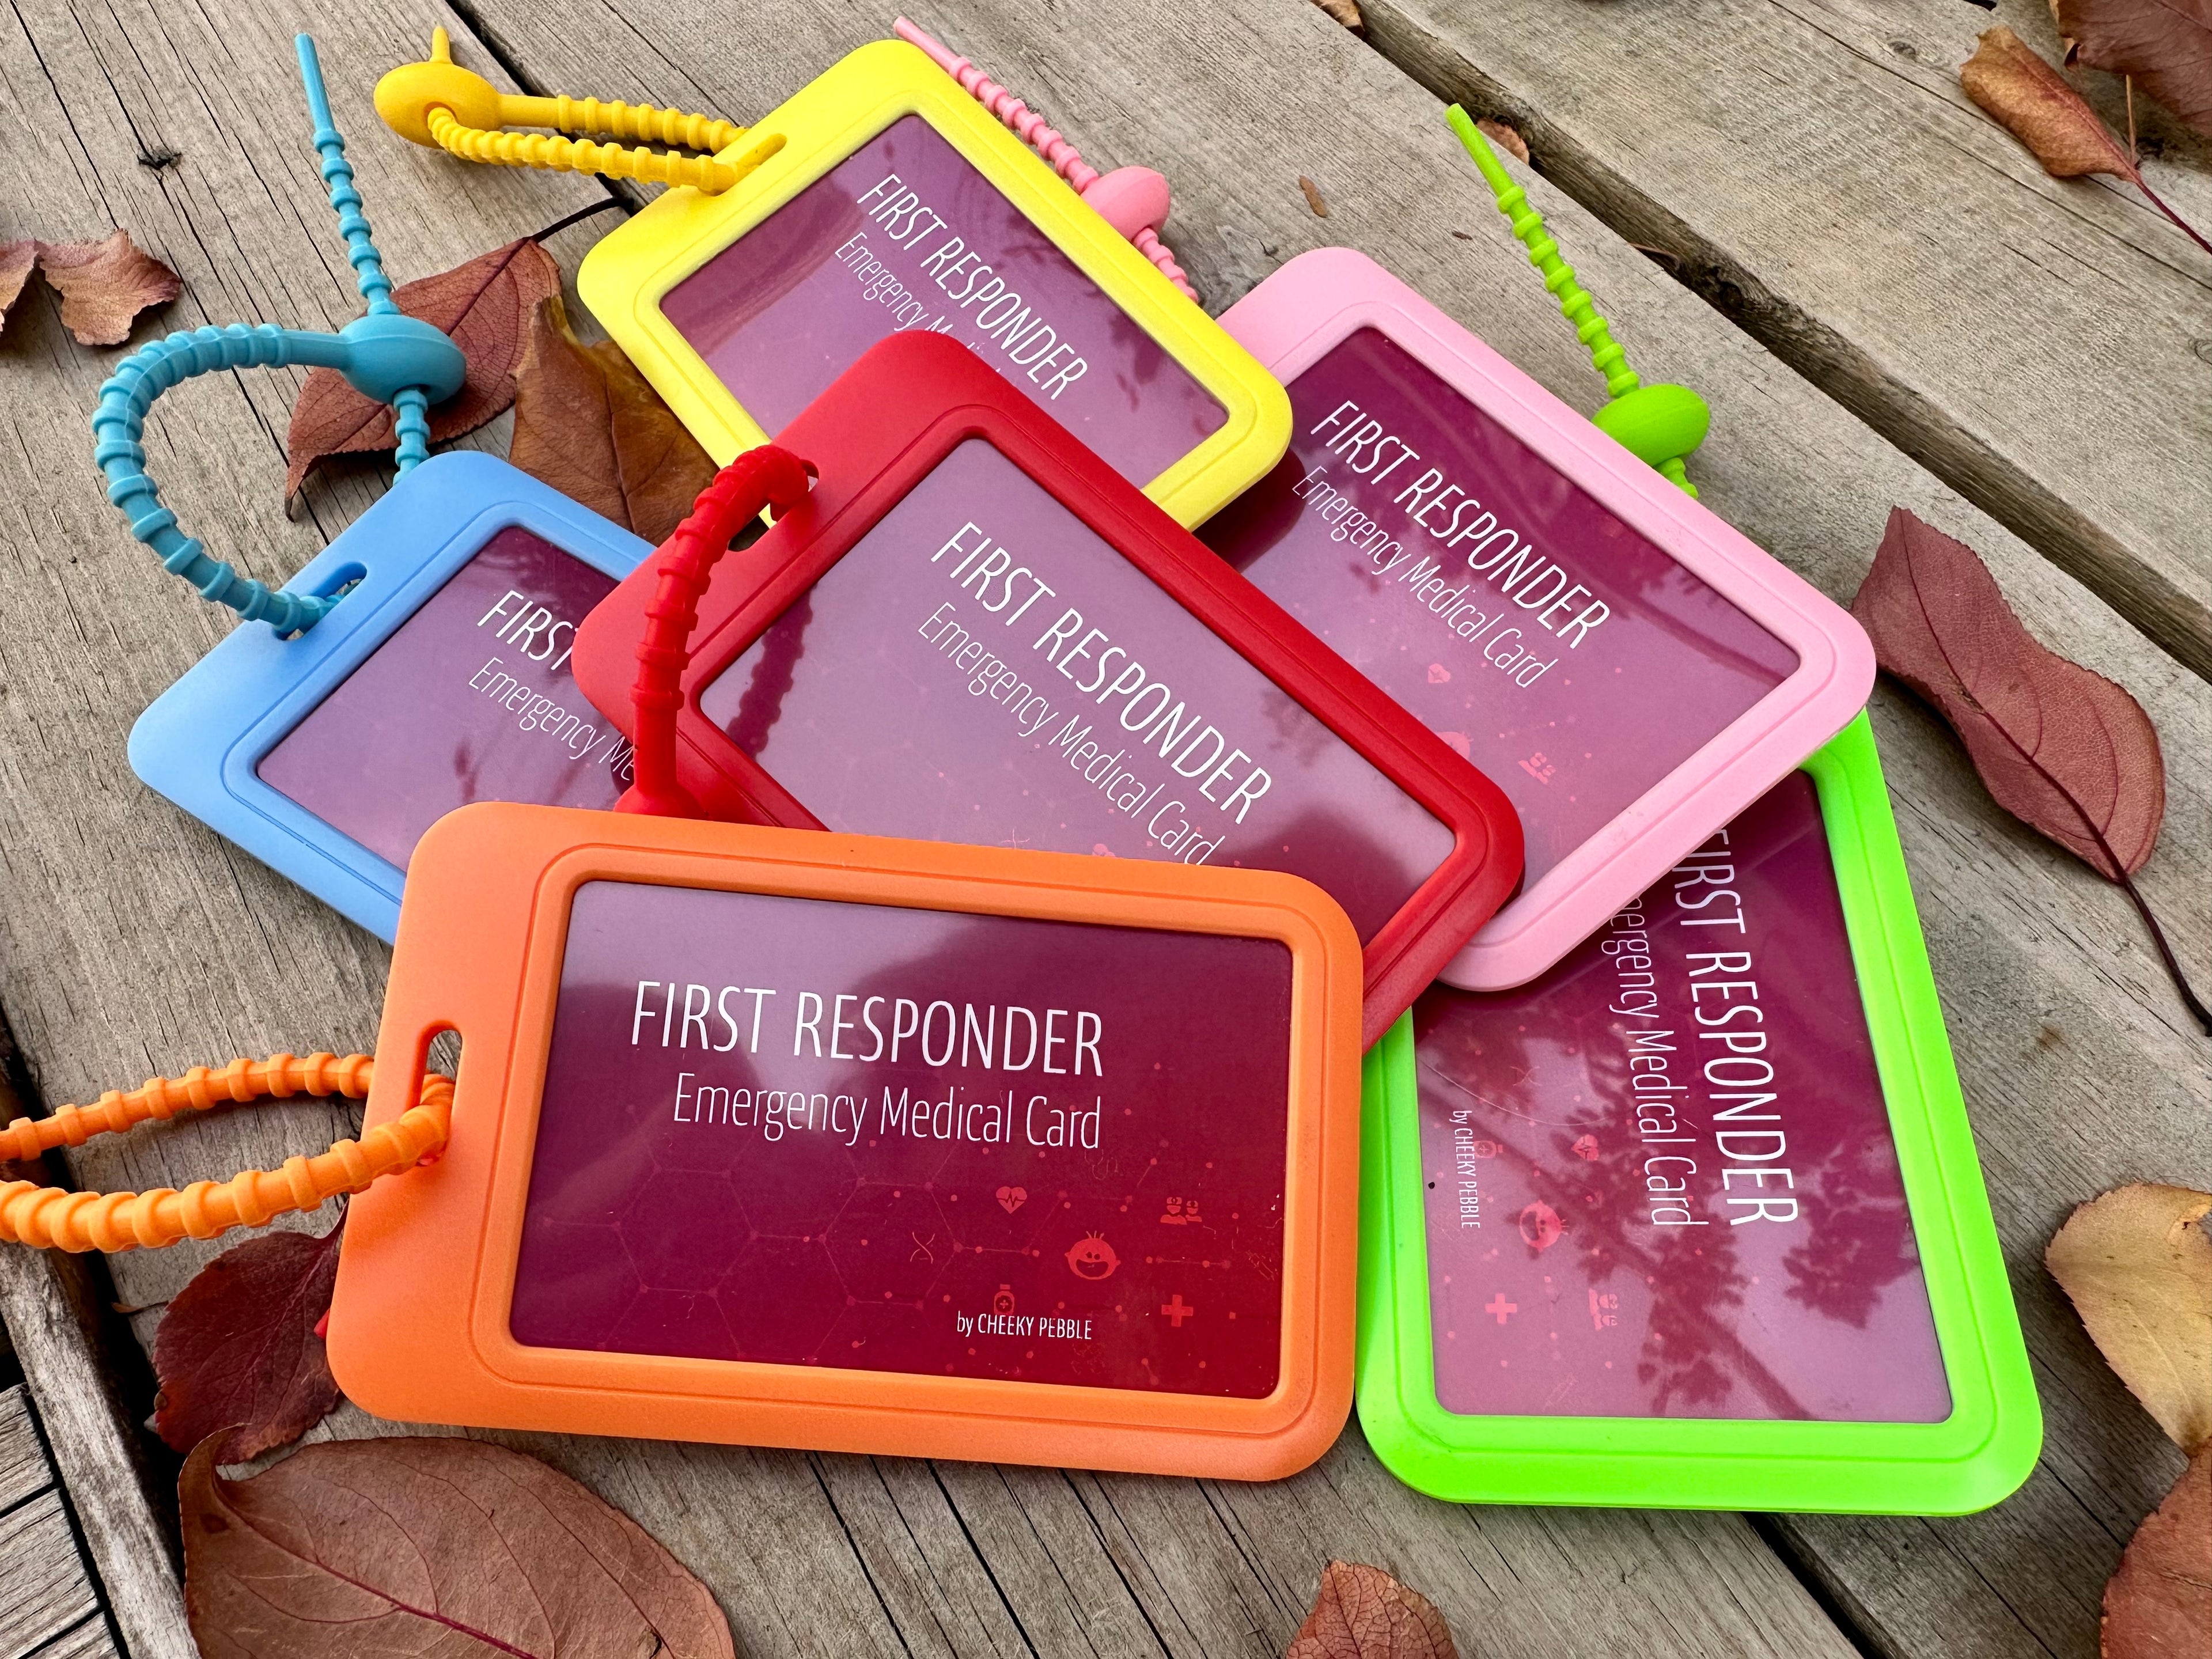 First responder Emergency Cards shown in Red, orange, yellow, green, blue and pink. Created and designed by Cheeky Pebble